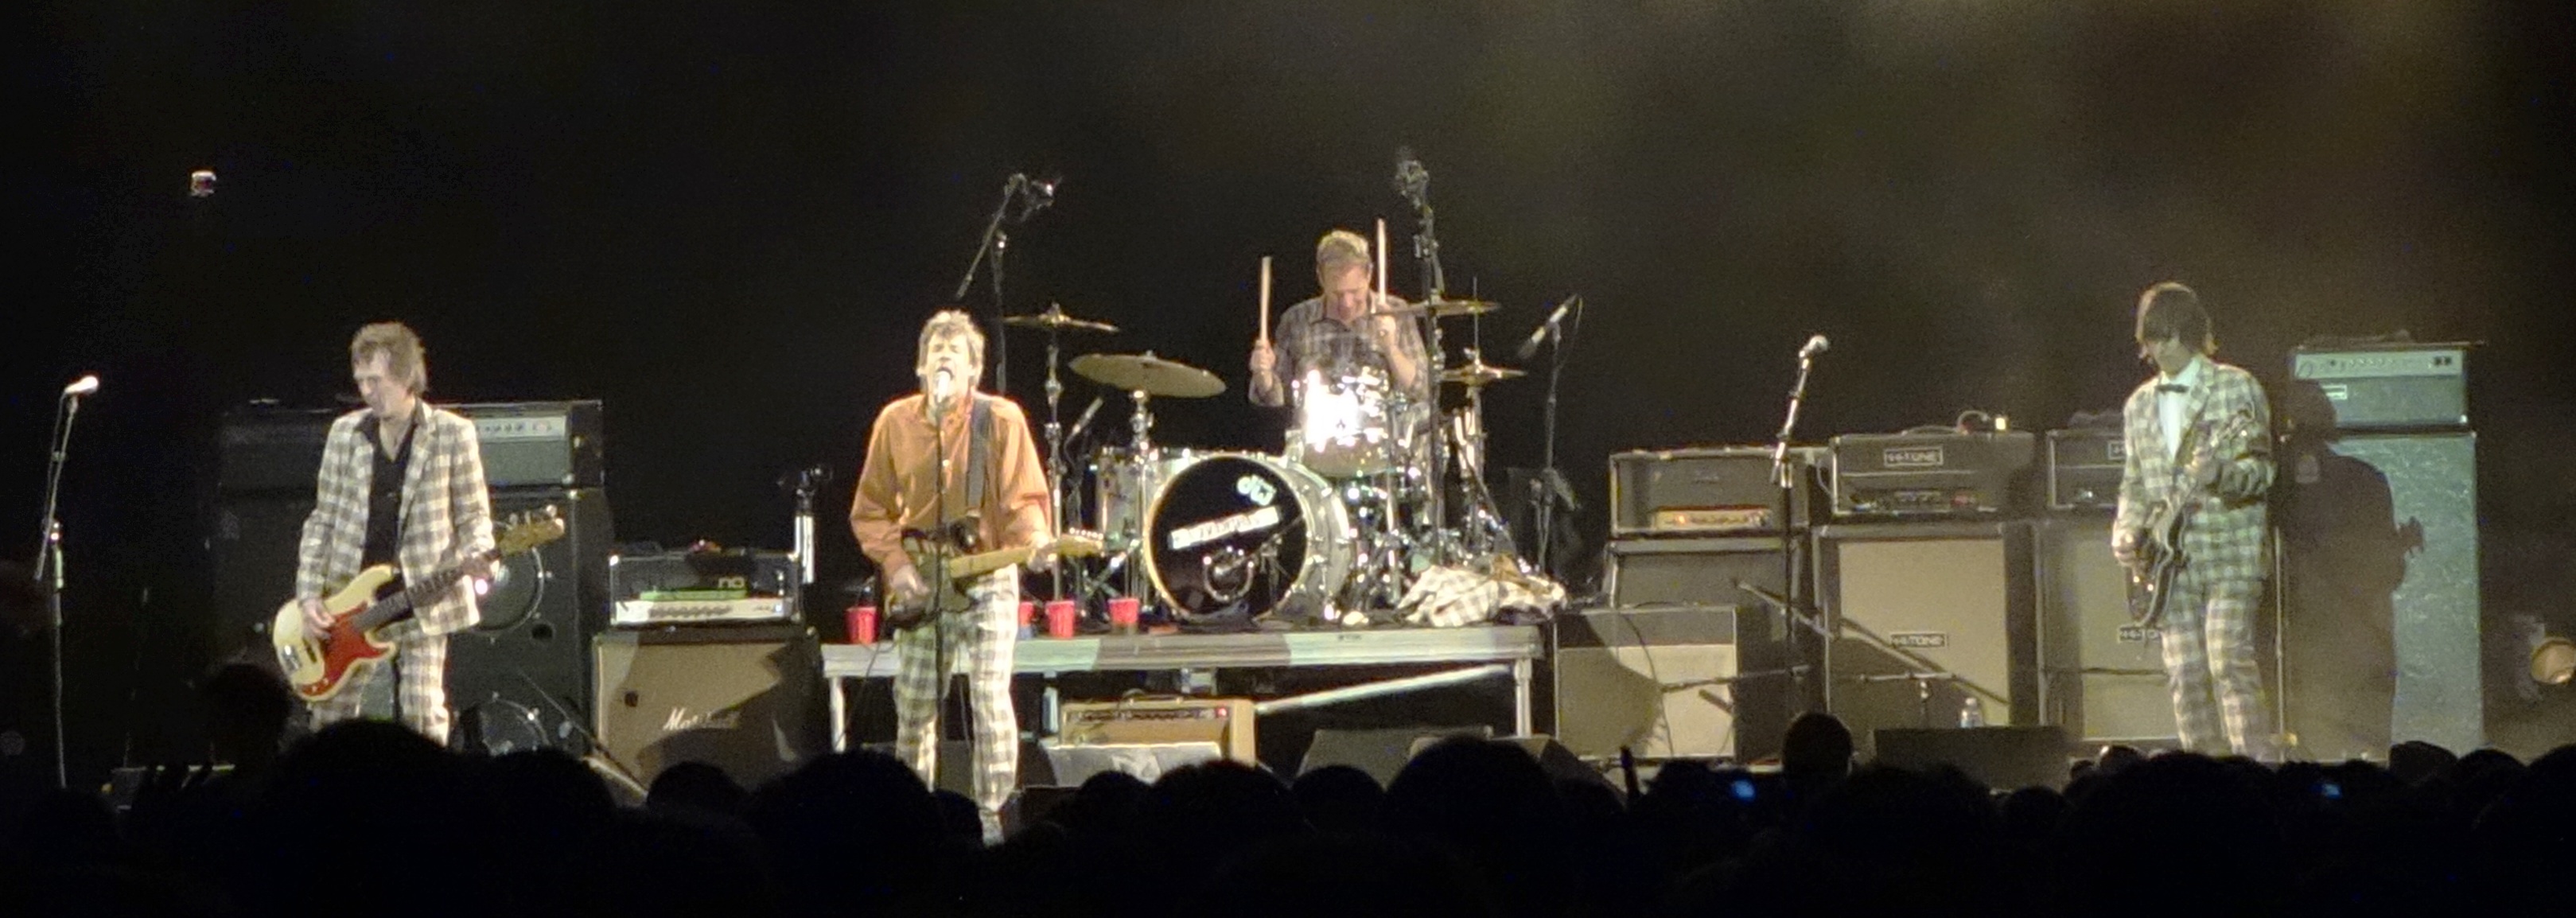 The-Replacements-Midway-Stadium-St-Paul-2014-4